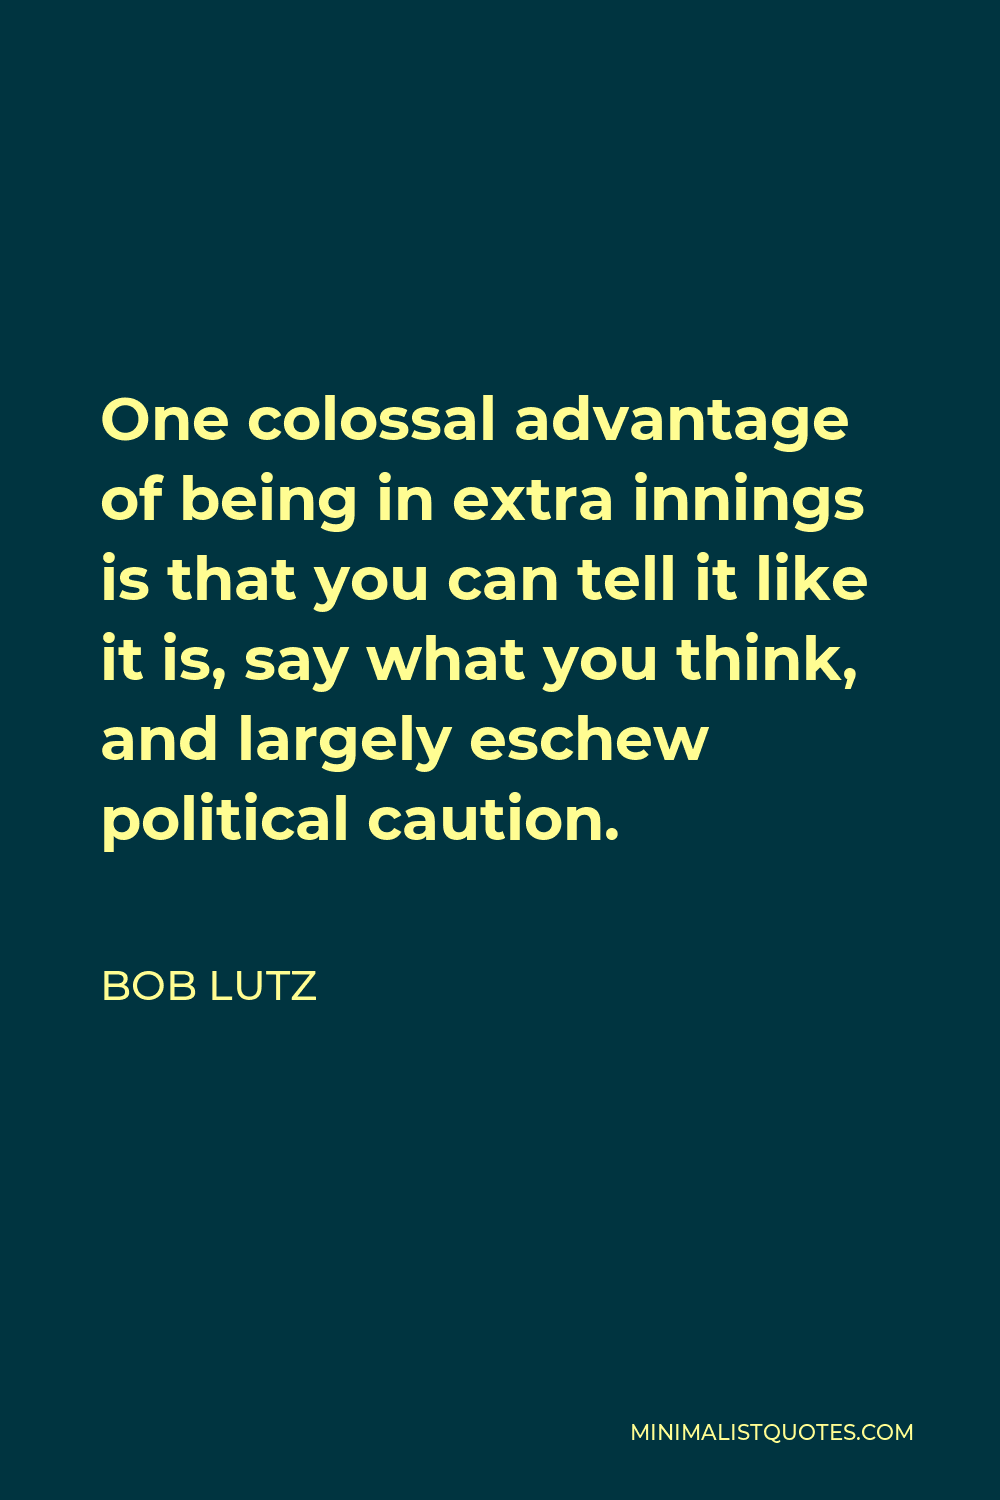 Bob Lutz Quote - One colossal advantage of being in extra innings is that you can tell it like it is, say what you think, and largely eschew political caution.